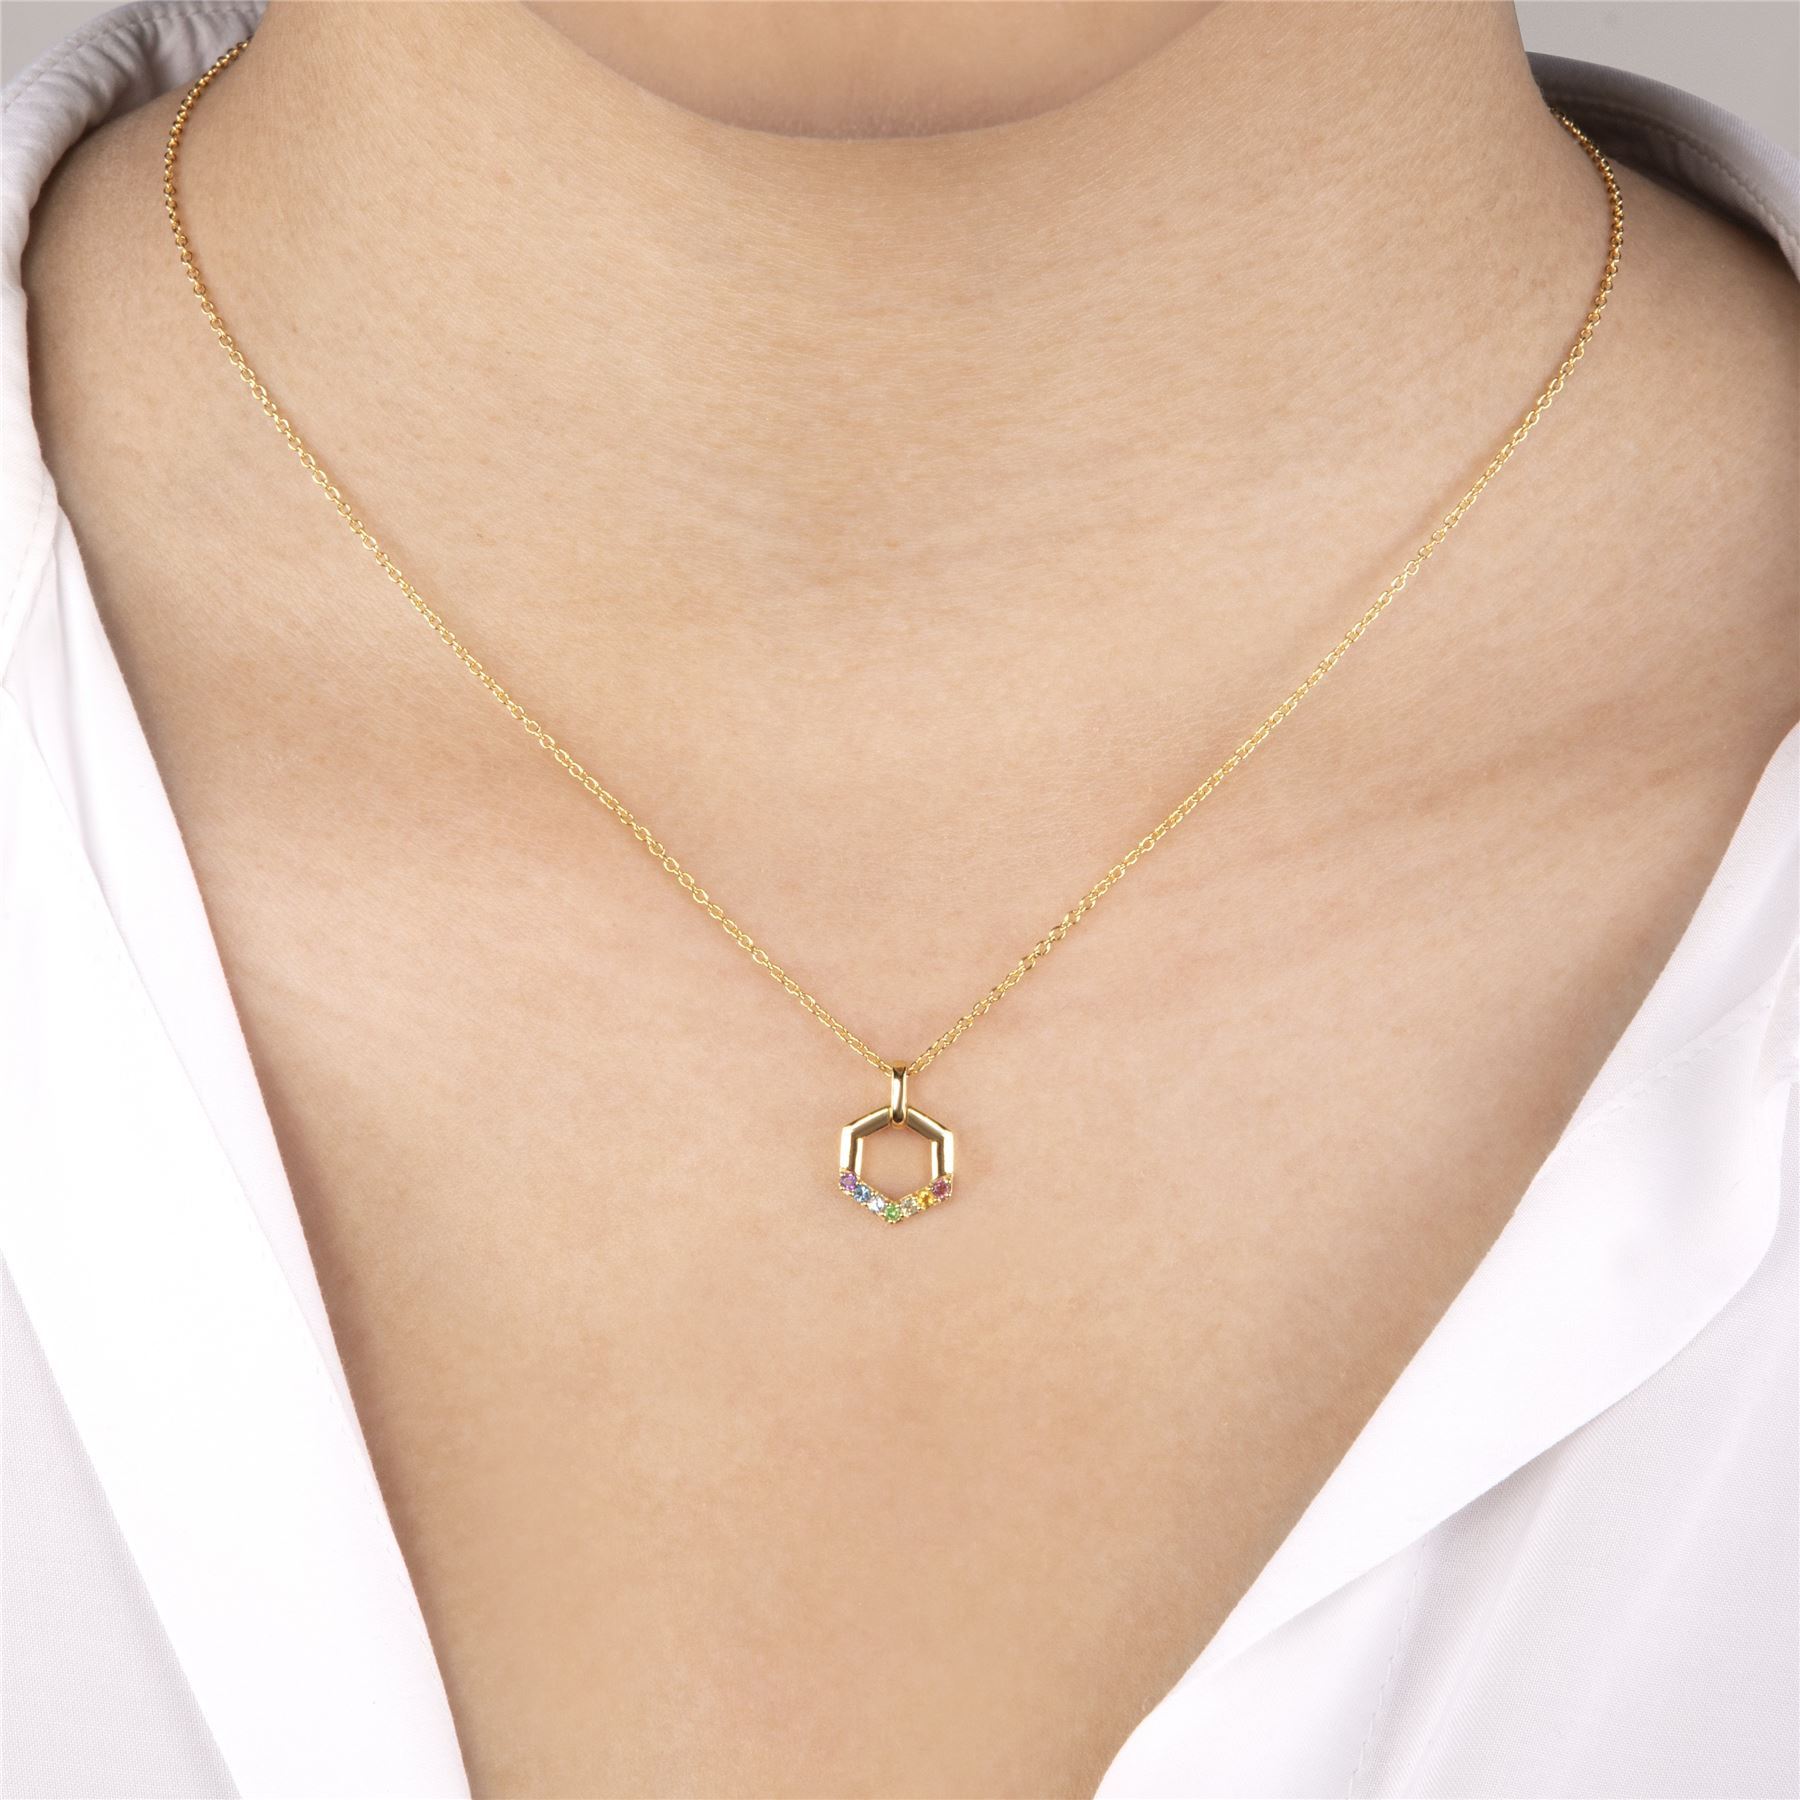 Rainbow Hexagon Necklace in Gold Plated Sterling Silver on model